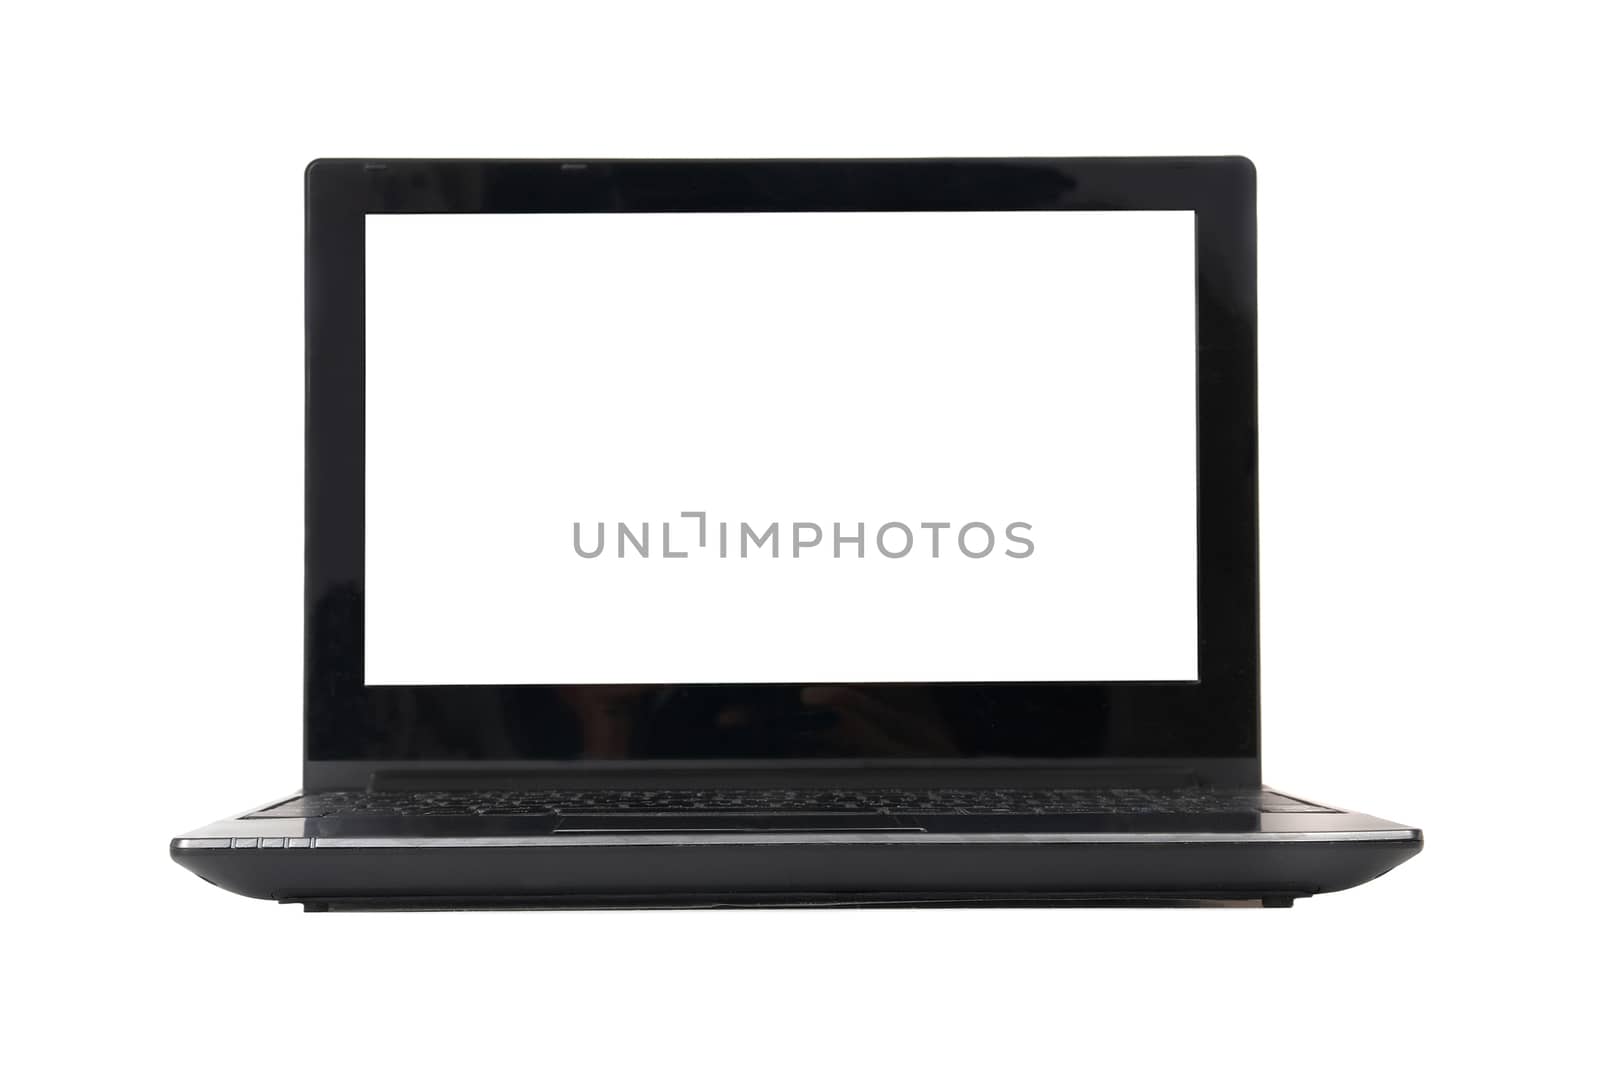 Laptop with empty screen isolated on white. Front view.